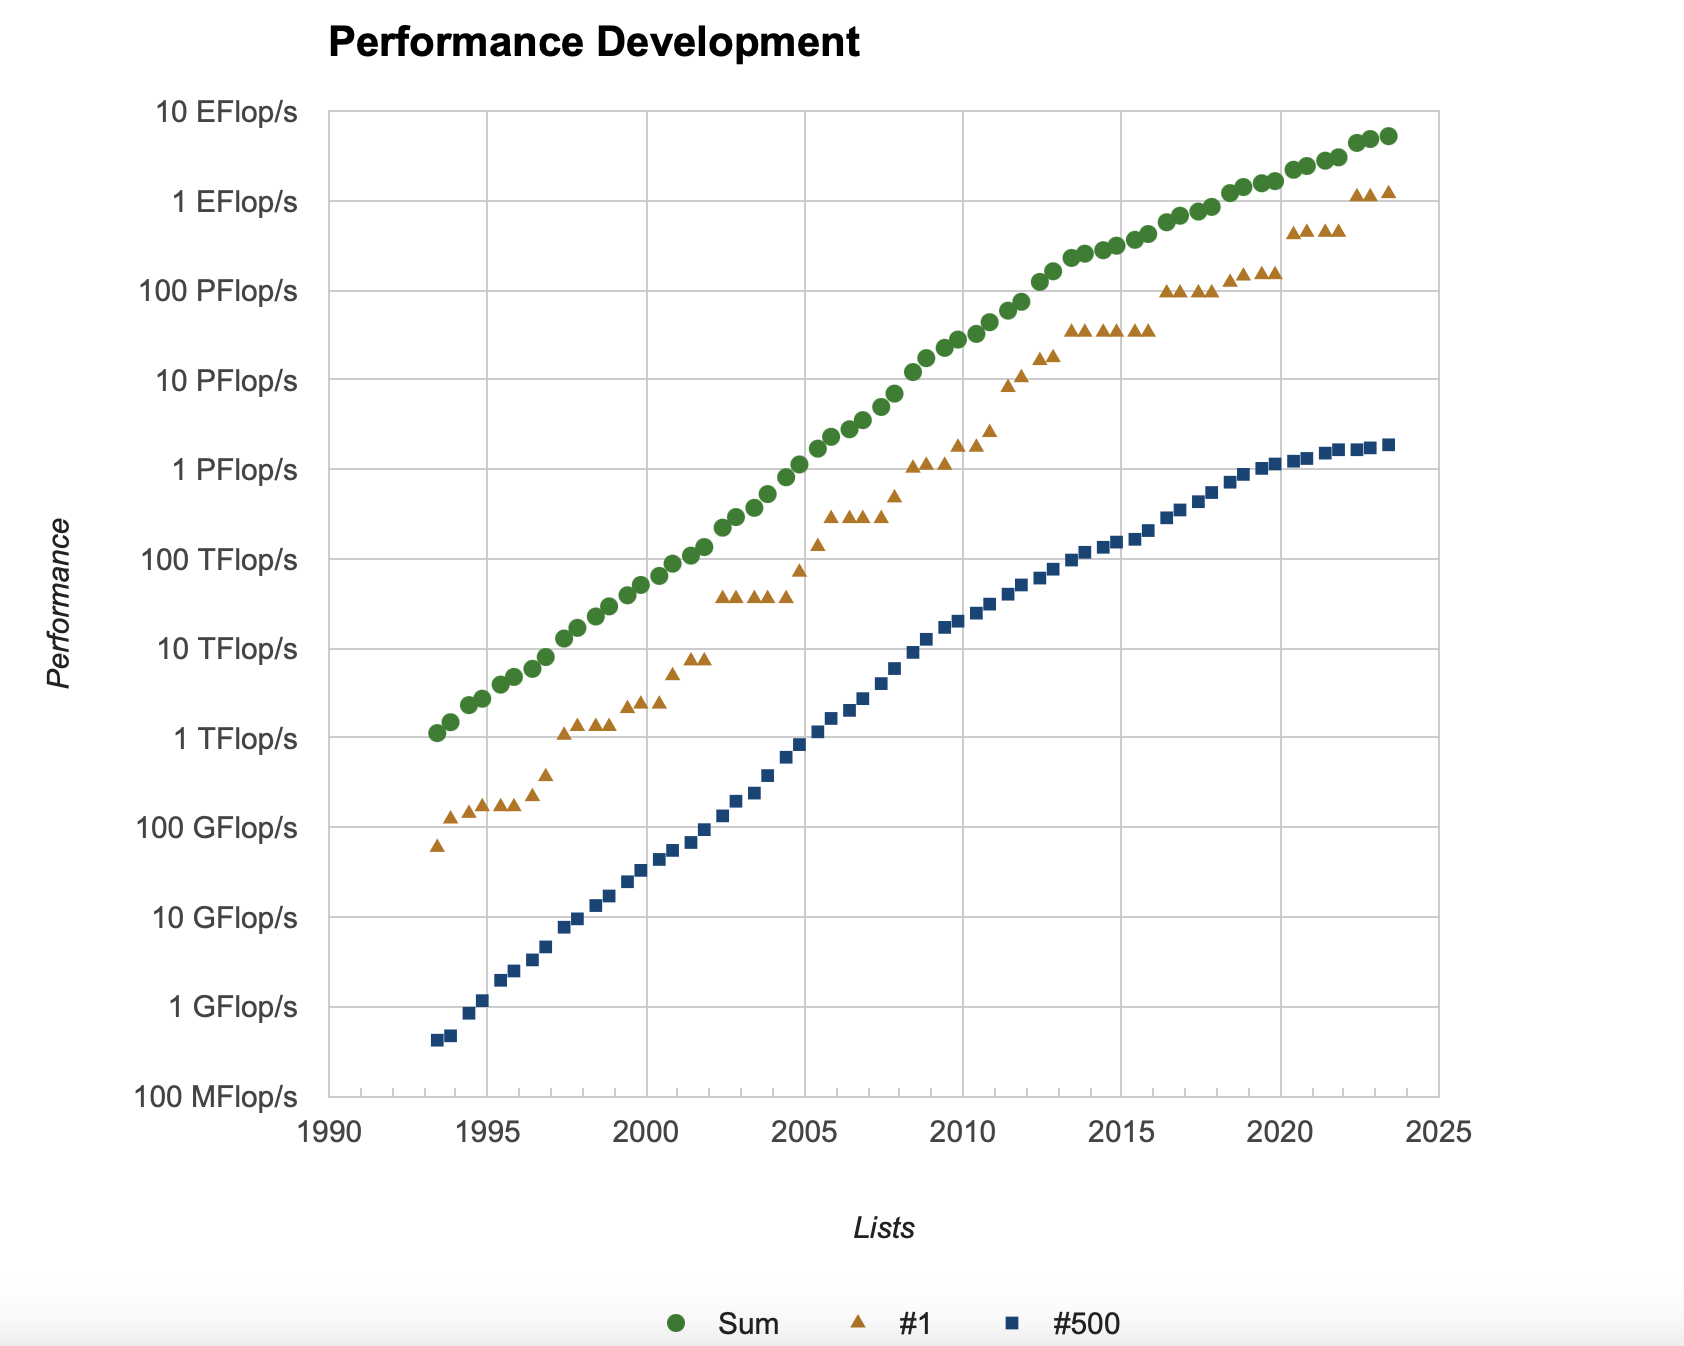 Performance over time